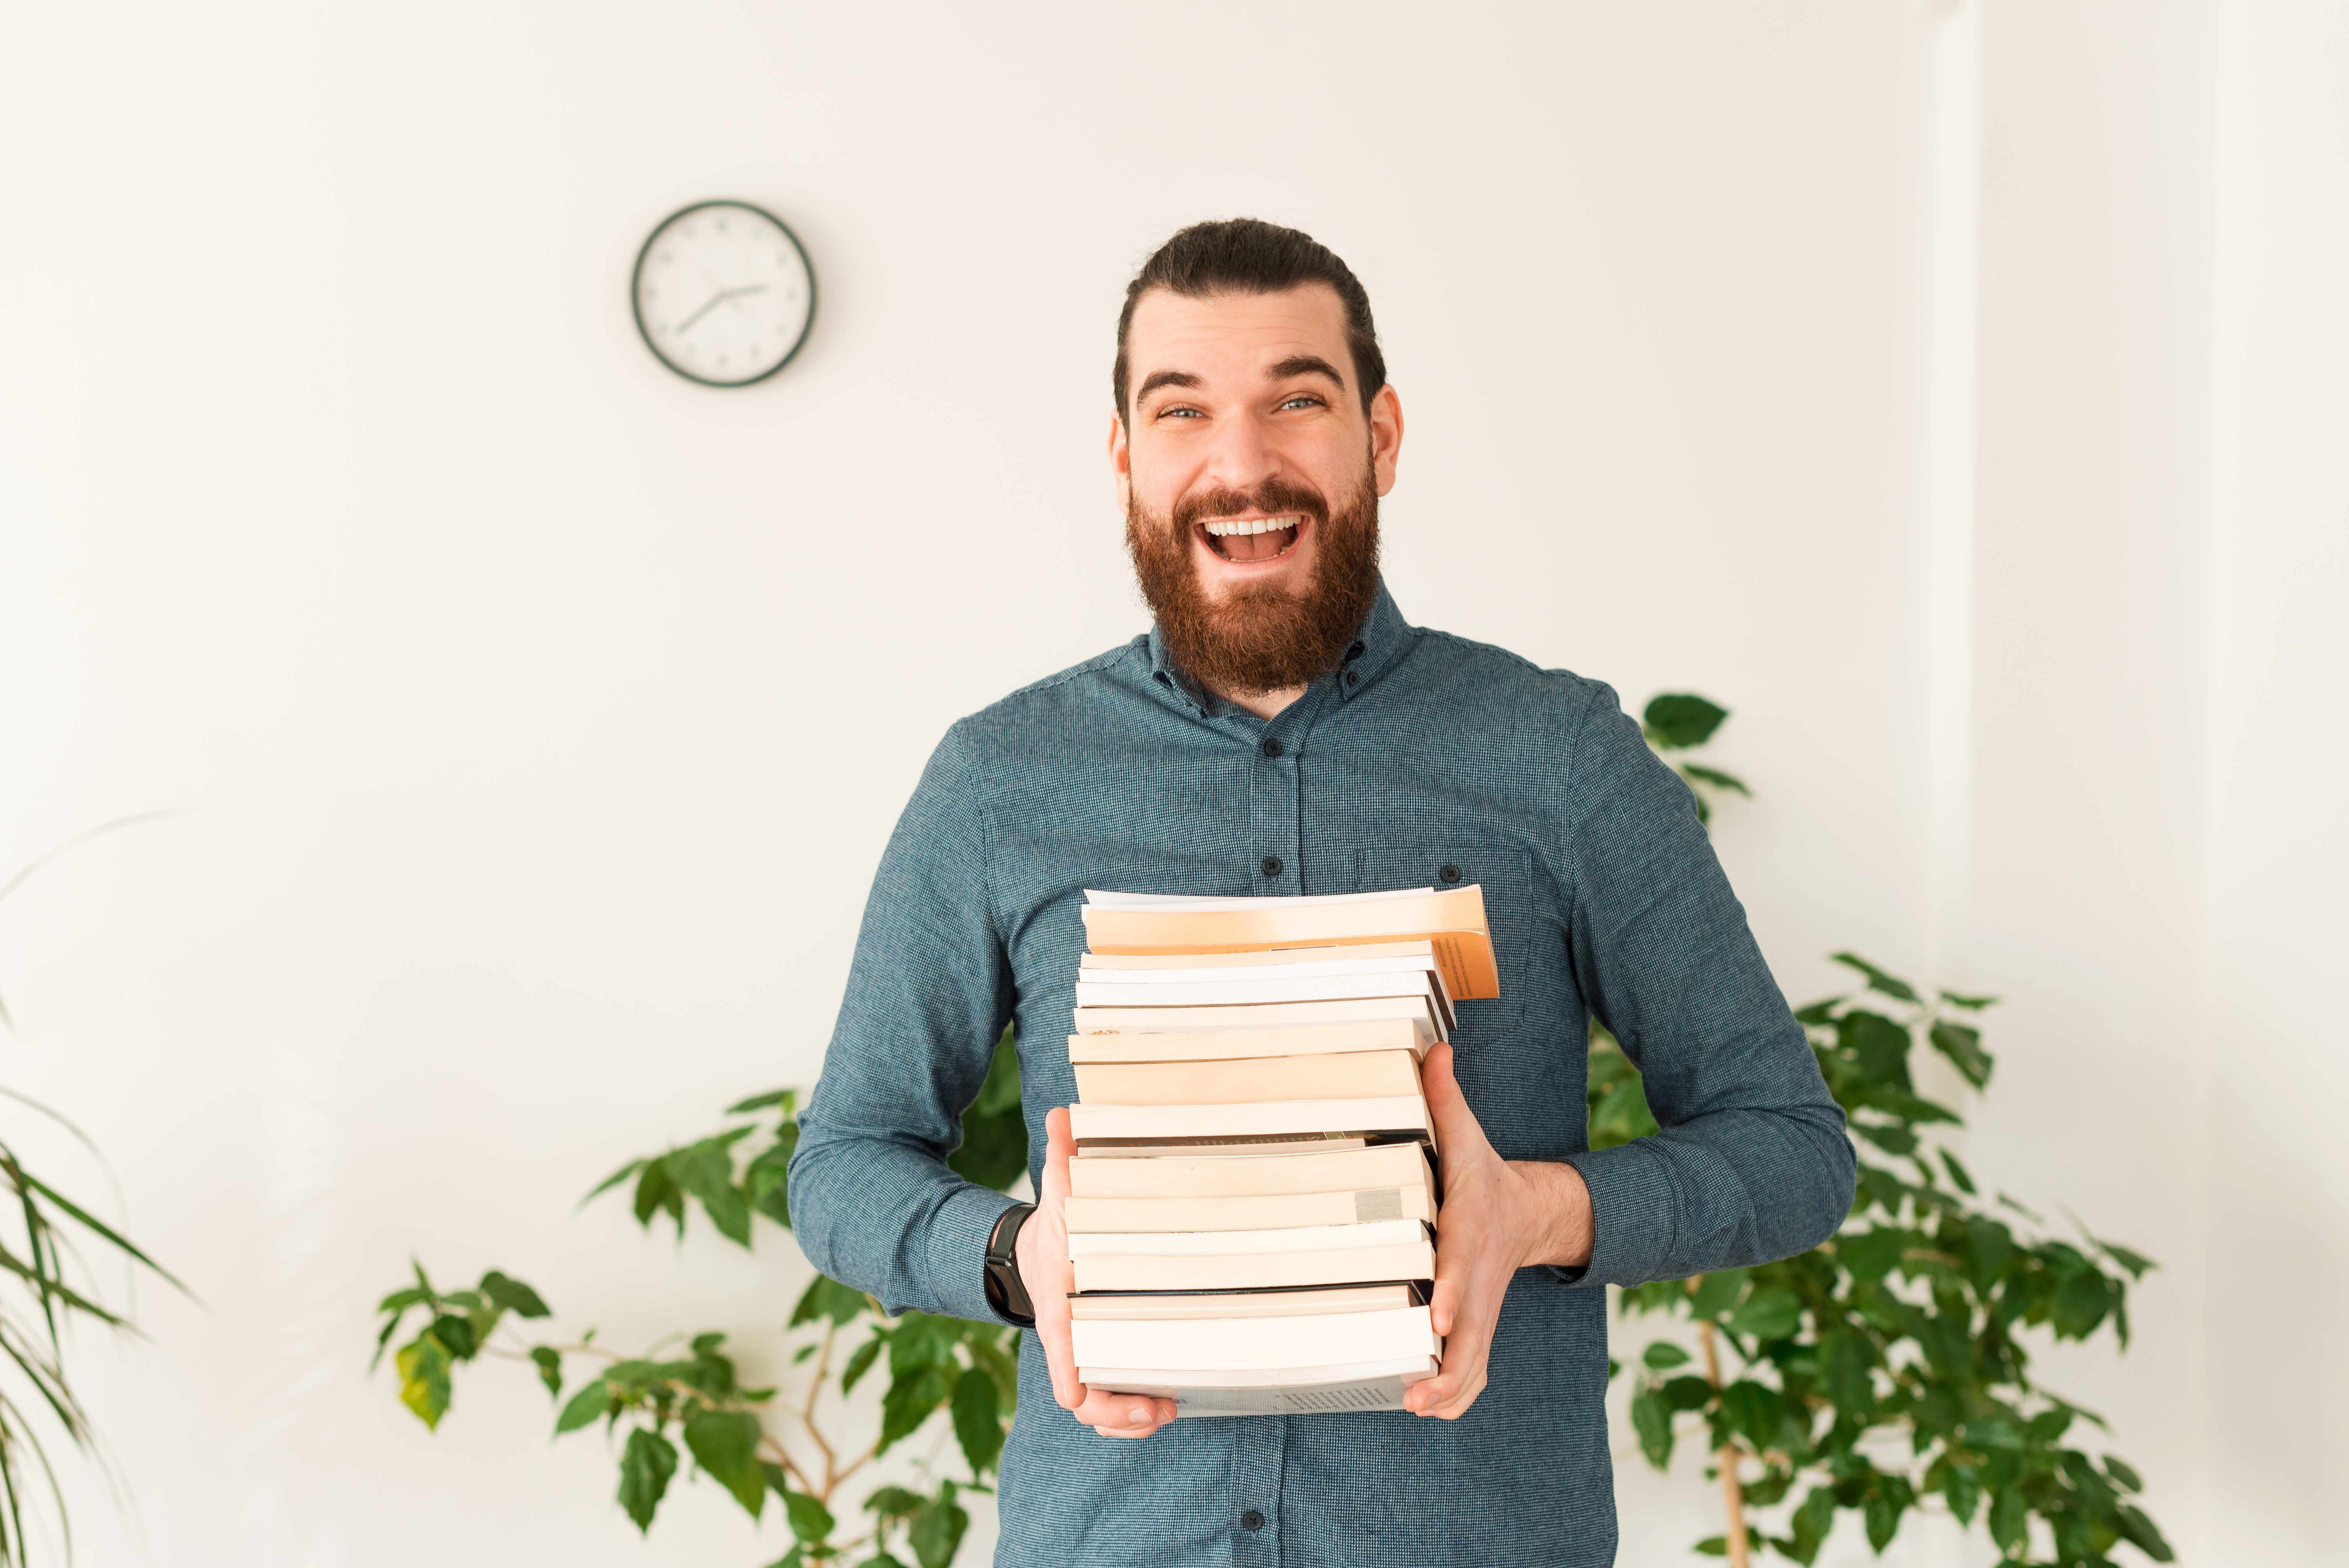 A man is excited to start reading the stack of books in his arms.